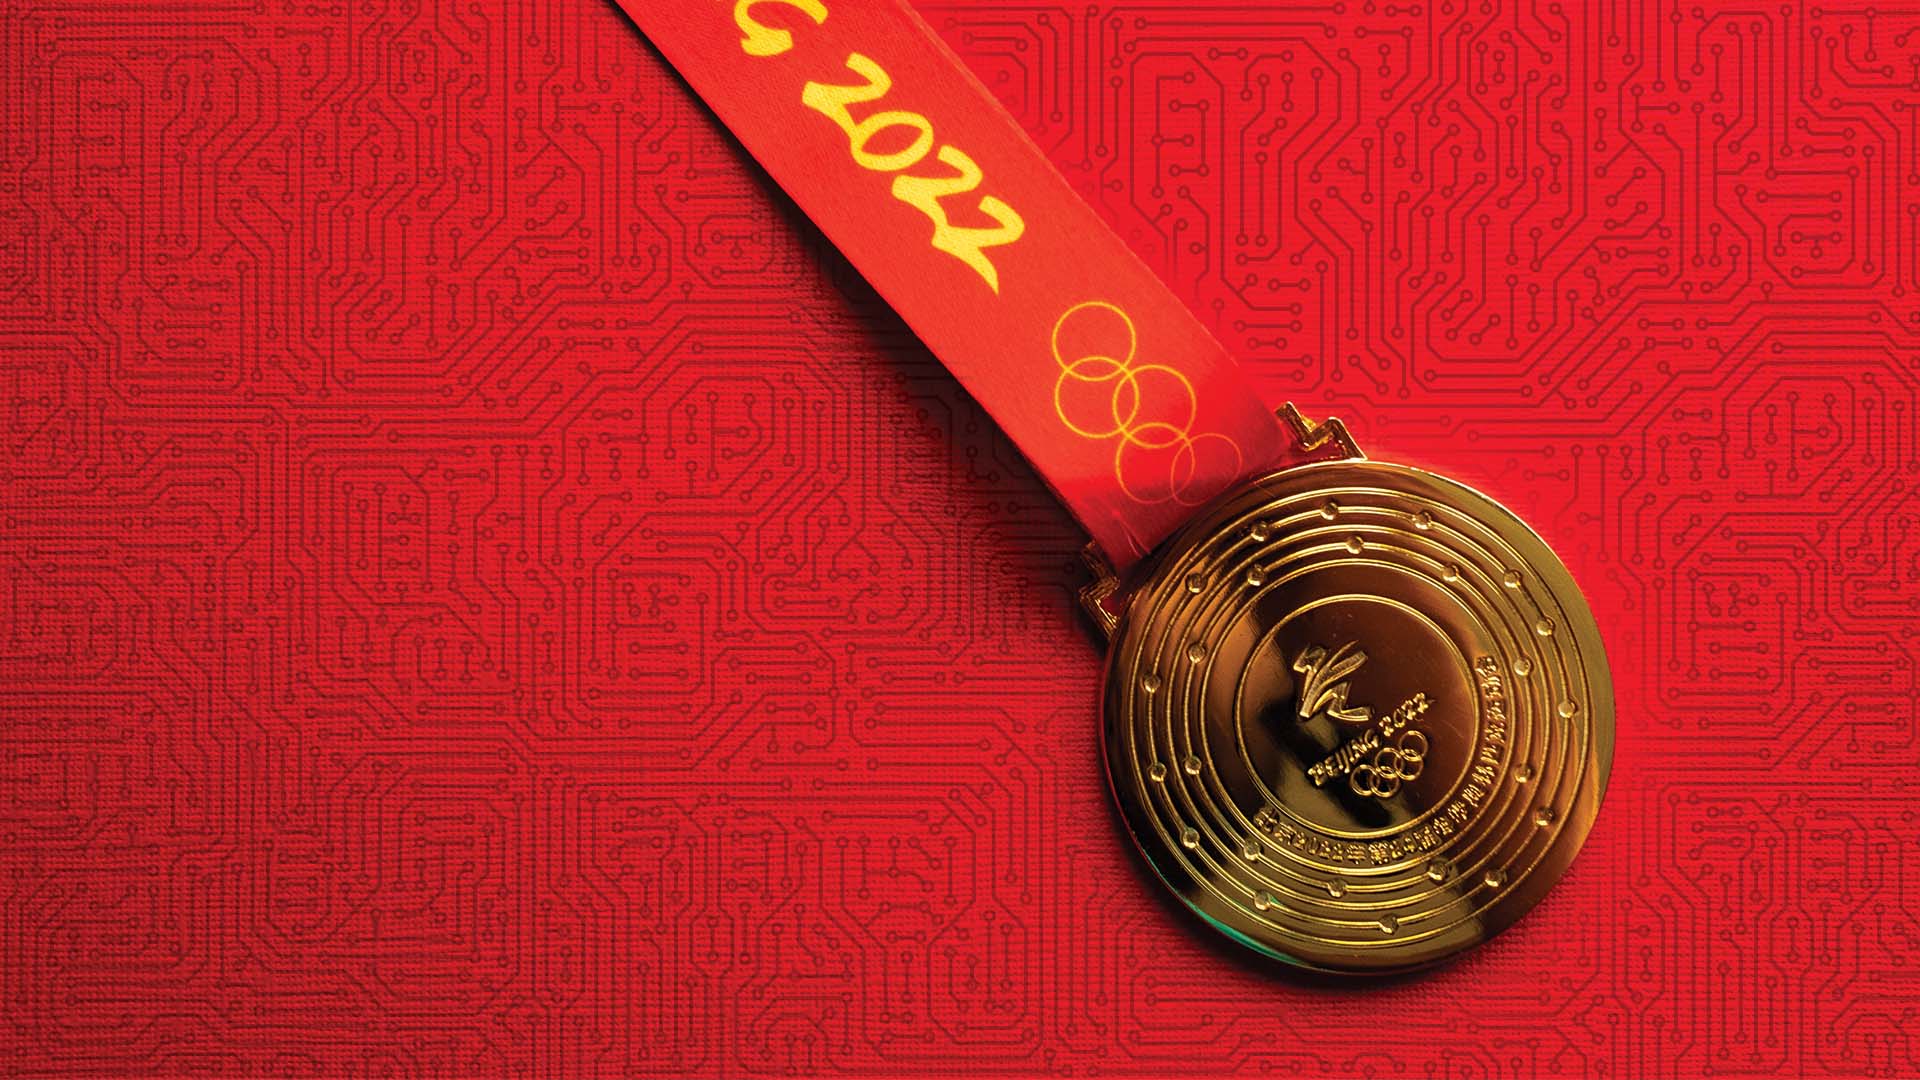 innovative technology beijing 2022 olympic games